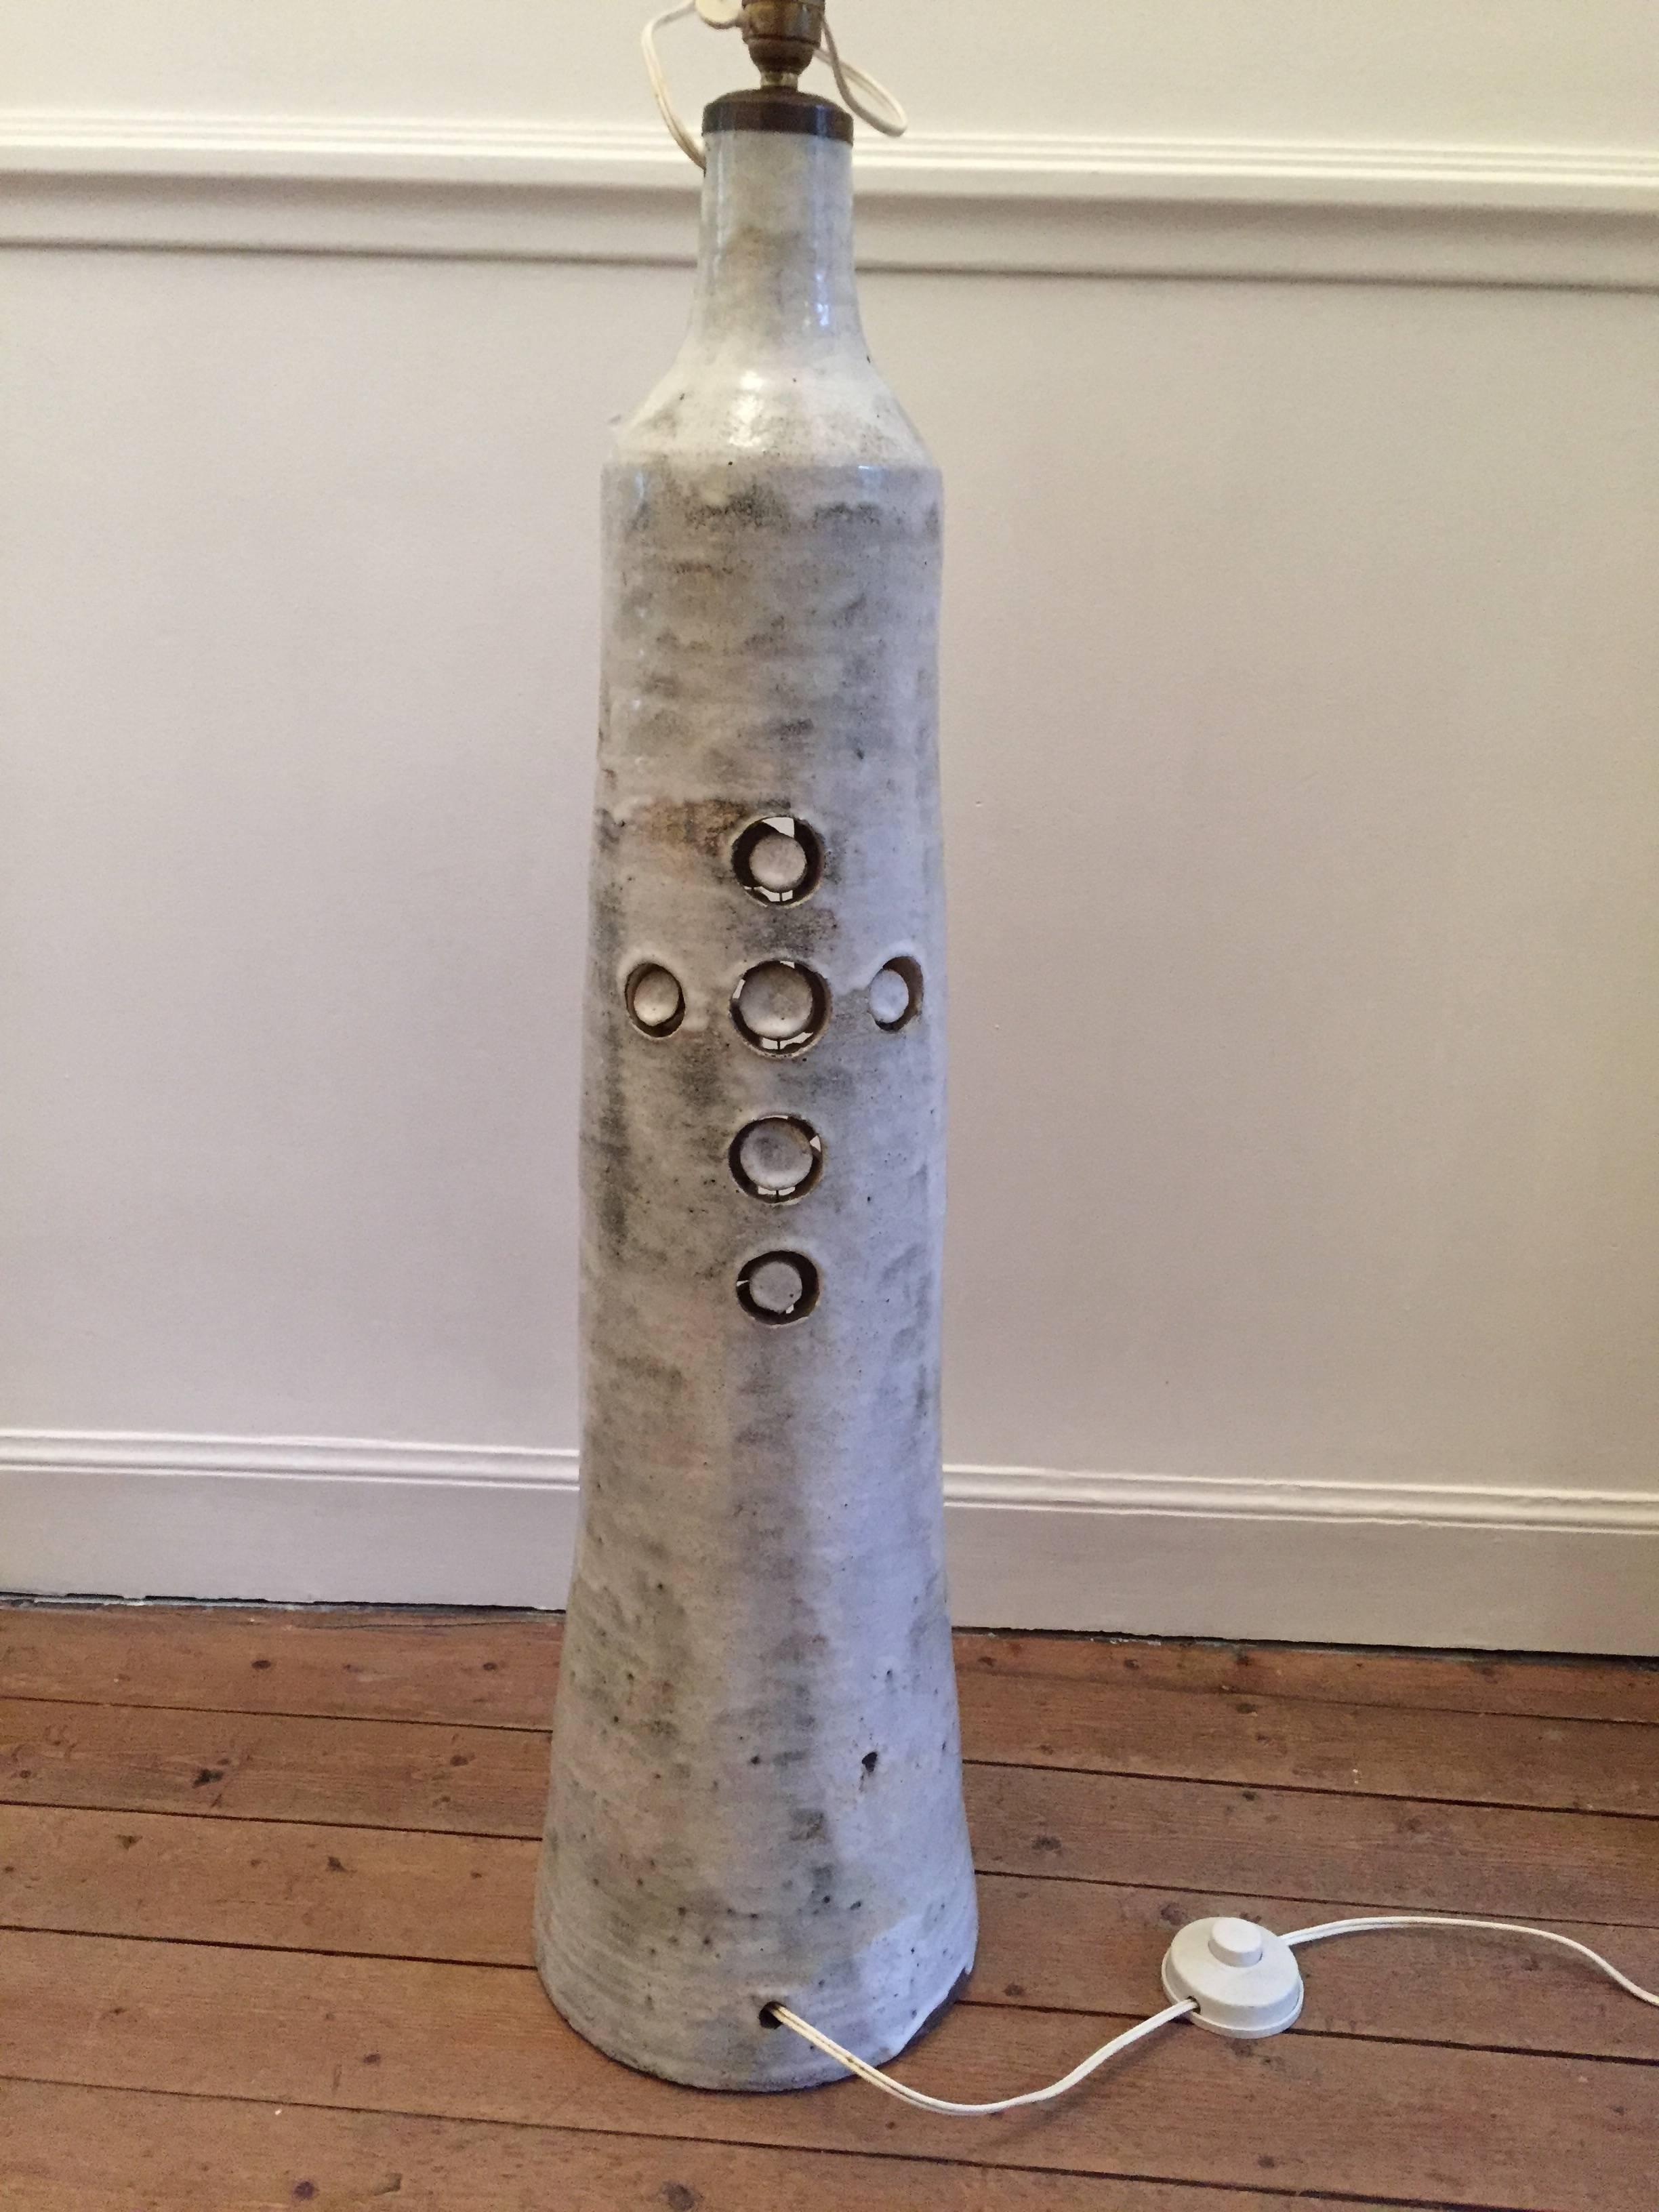 impresive ceramic floor lamp by Georges Pelletier circa 1970 decorated with stylized perforations and unglazed white ceramic pastilles. with original shade,perfect vintage condition

Dim lamp = H 83 / Diam 23 cm

Dim shade = H 80 / diam 45 cm